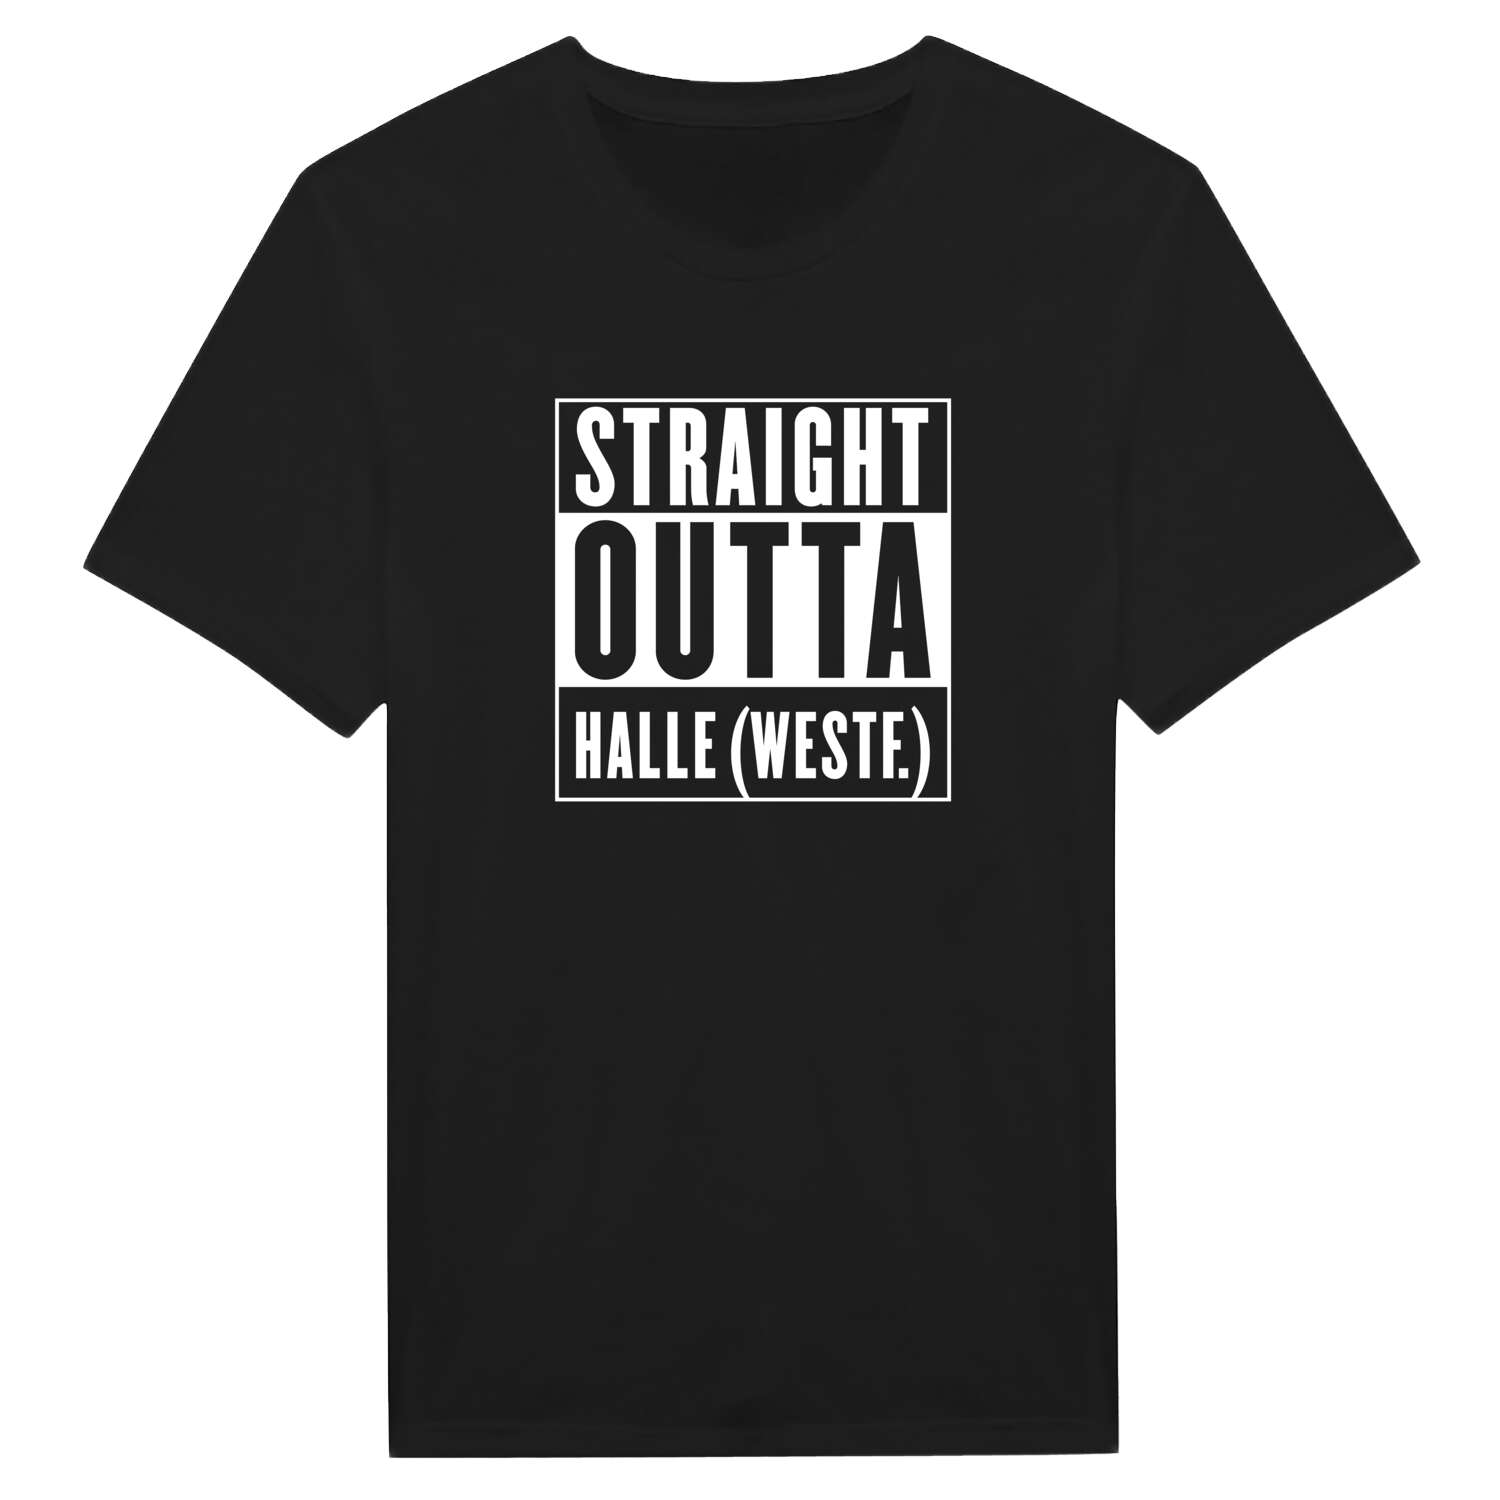 Halle (Westf.) T-Shirt »Straight Outta«